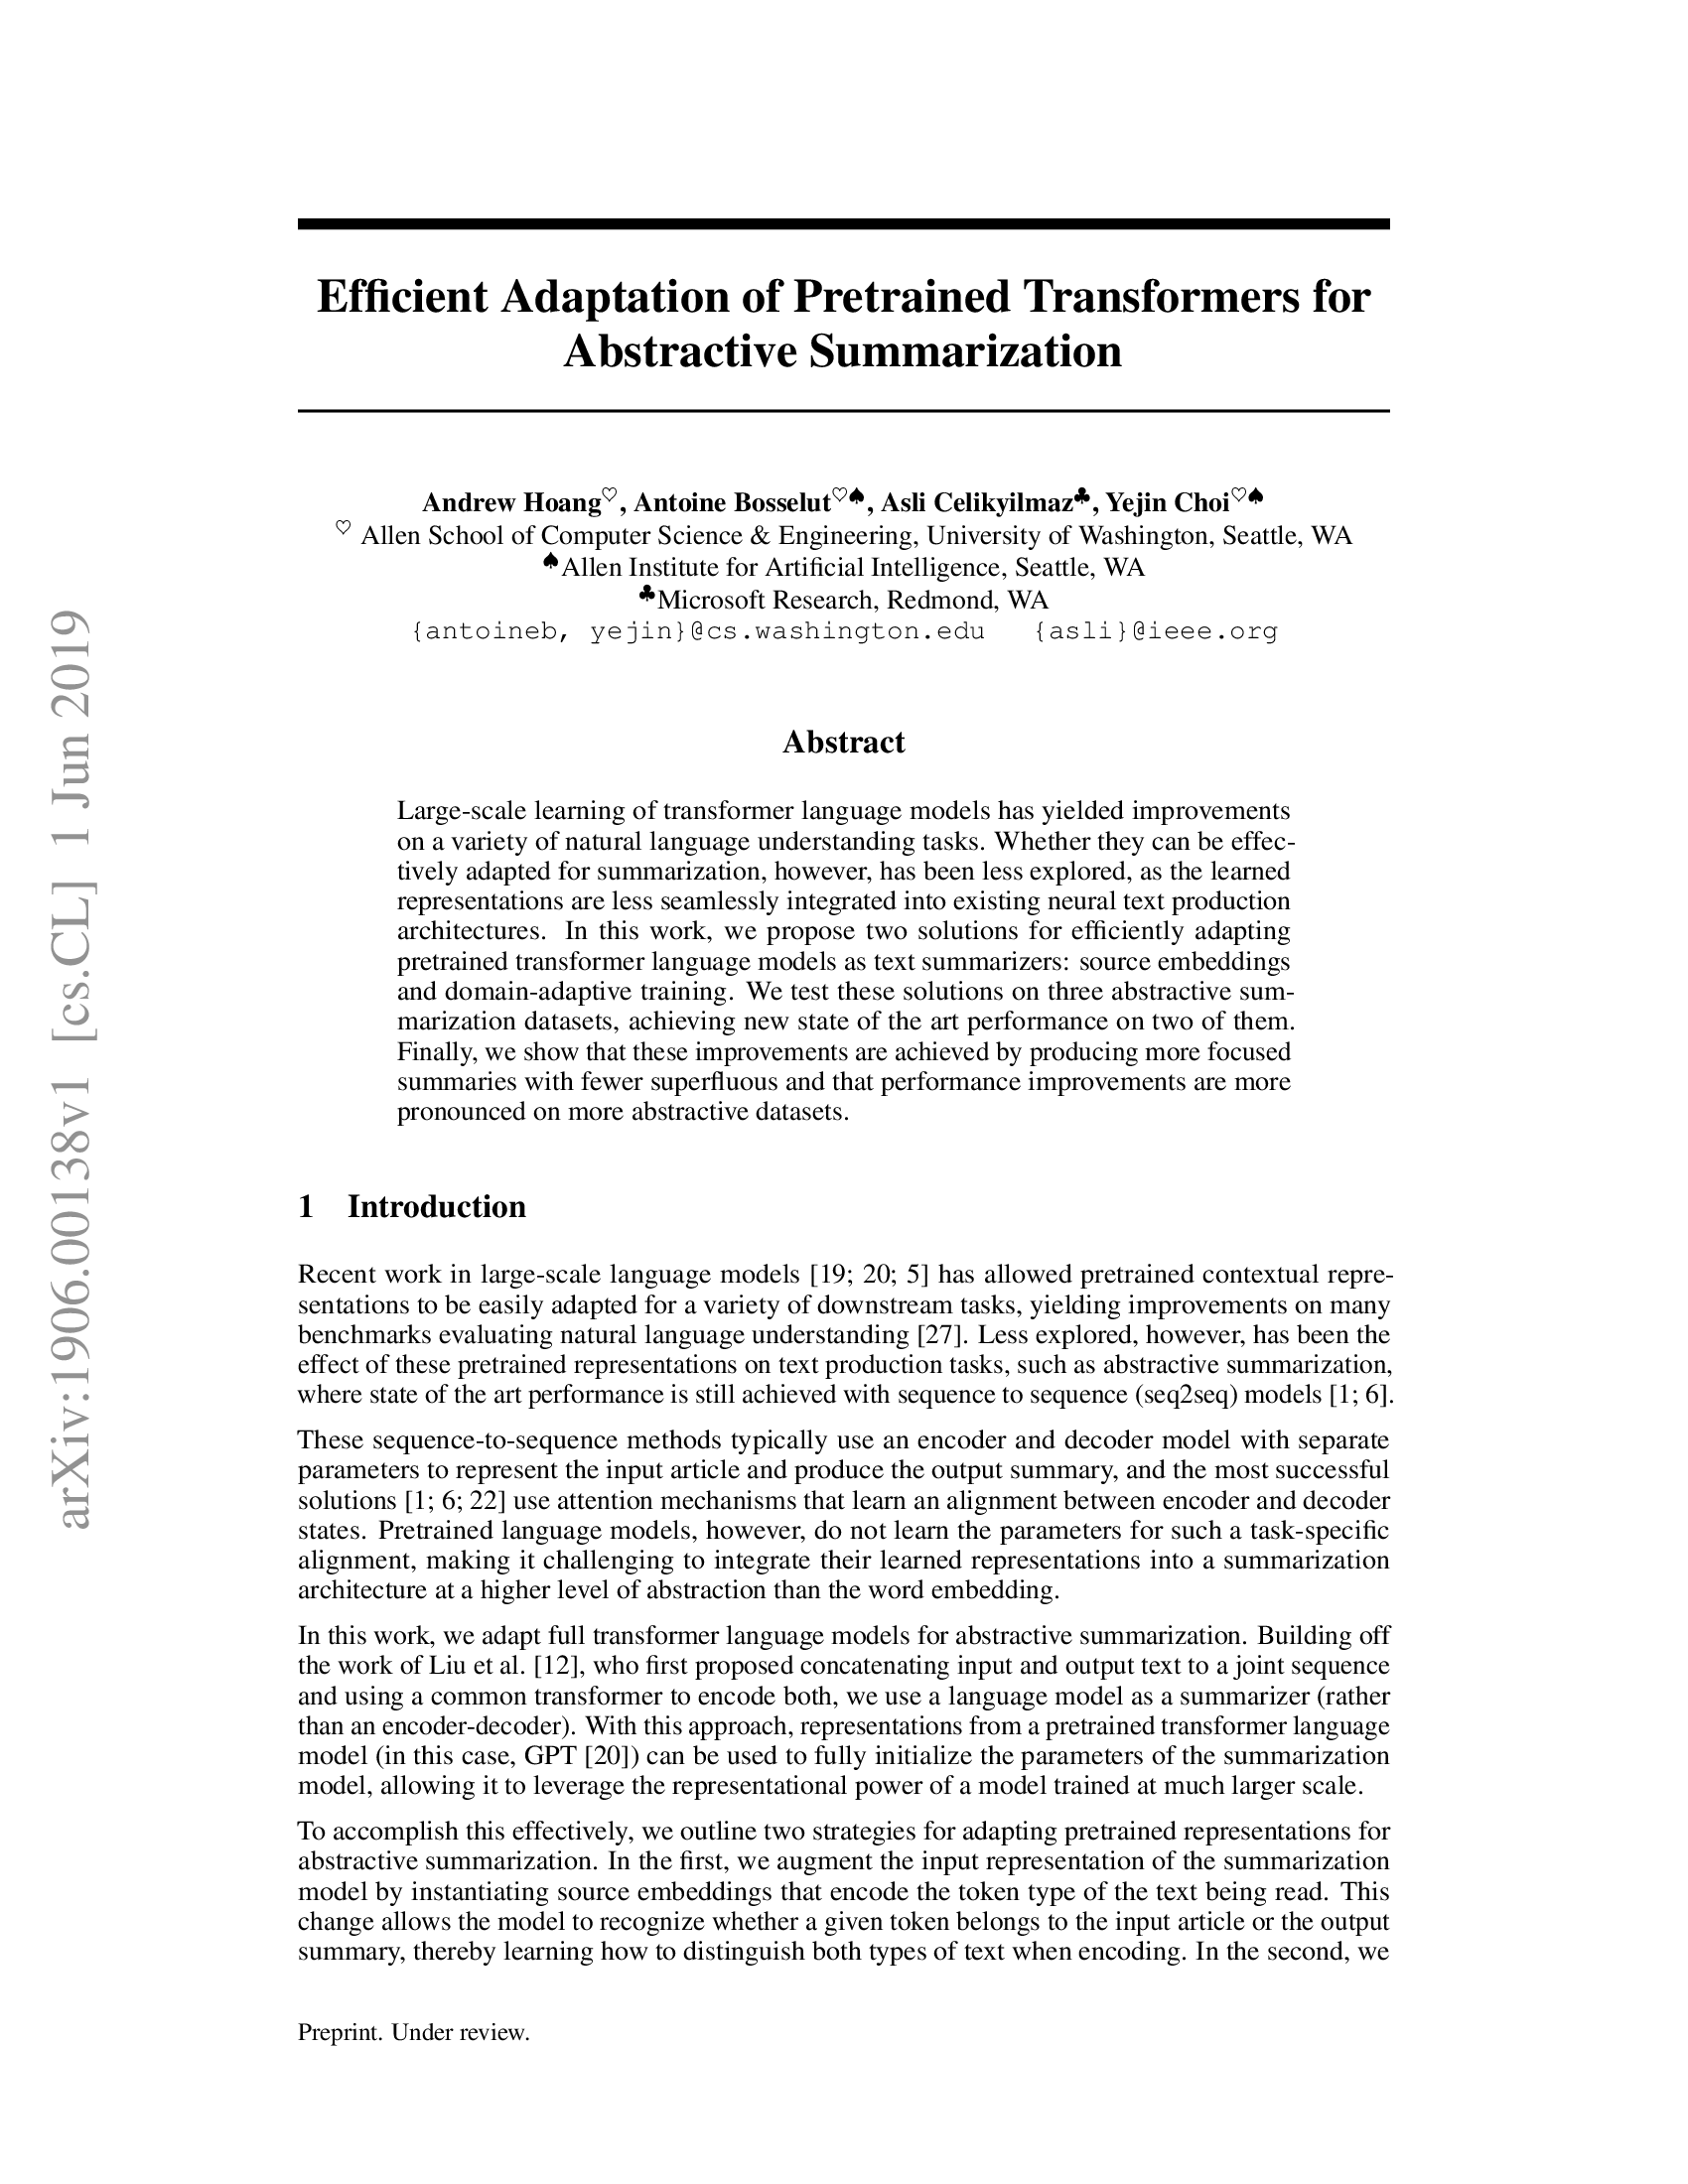 Efficient Adaptation of Pretrained Transformers for Abstractive Summarization